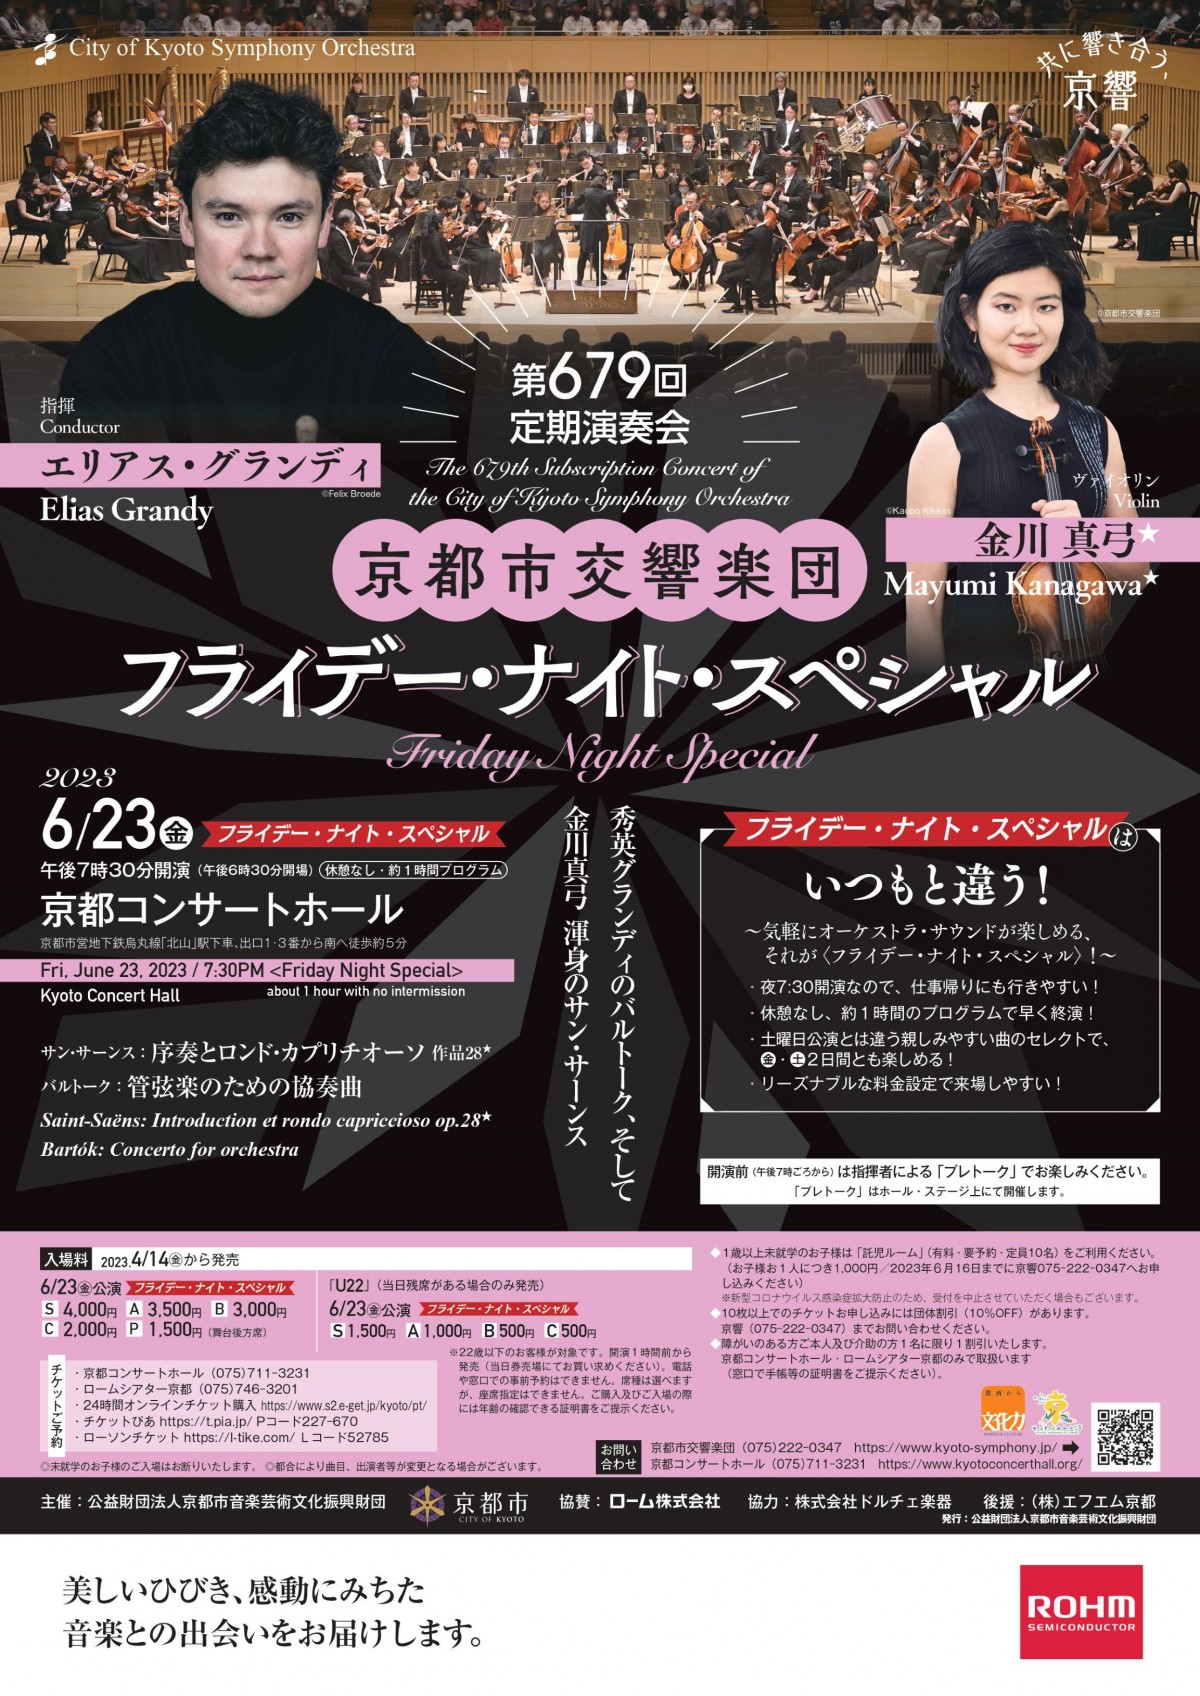 The 679th Subscription Concert
《Friday Night Special》